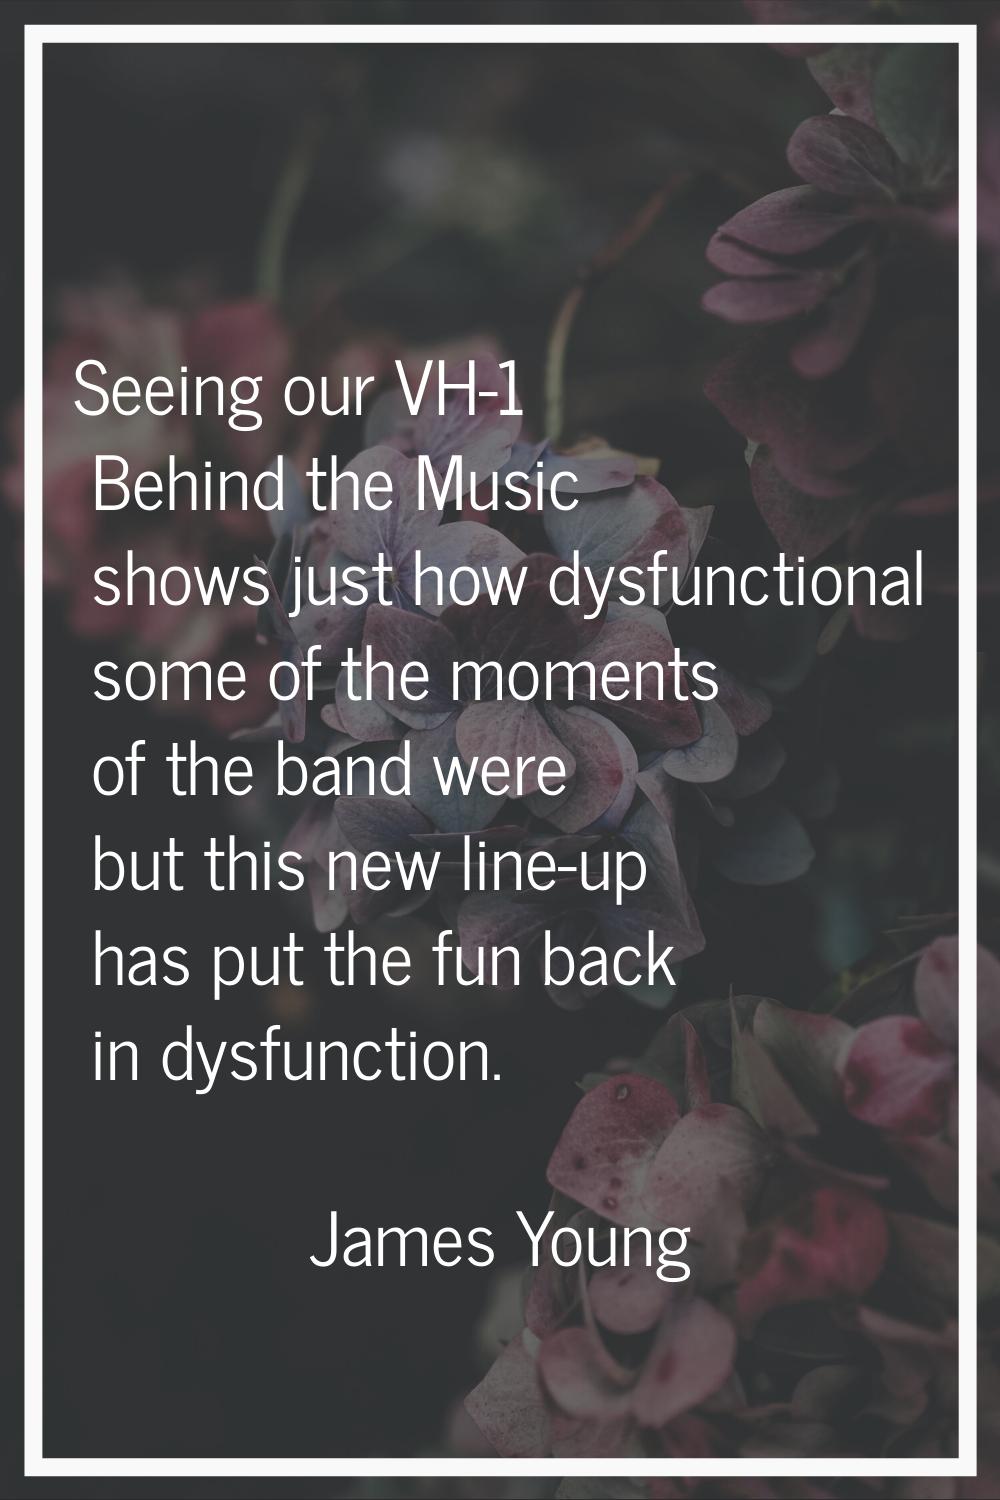 Seeing our VH-1 Behind the Music shows just how dysfunctional some of the moments of the band were 